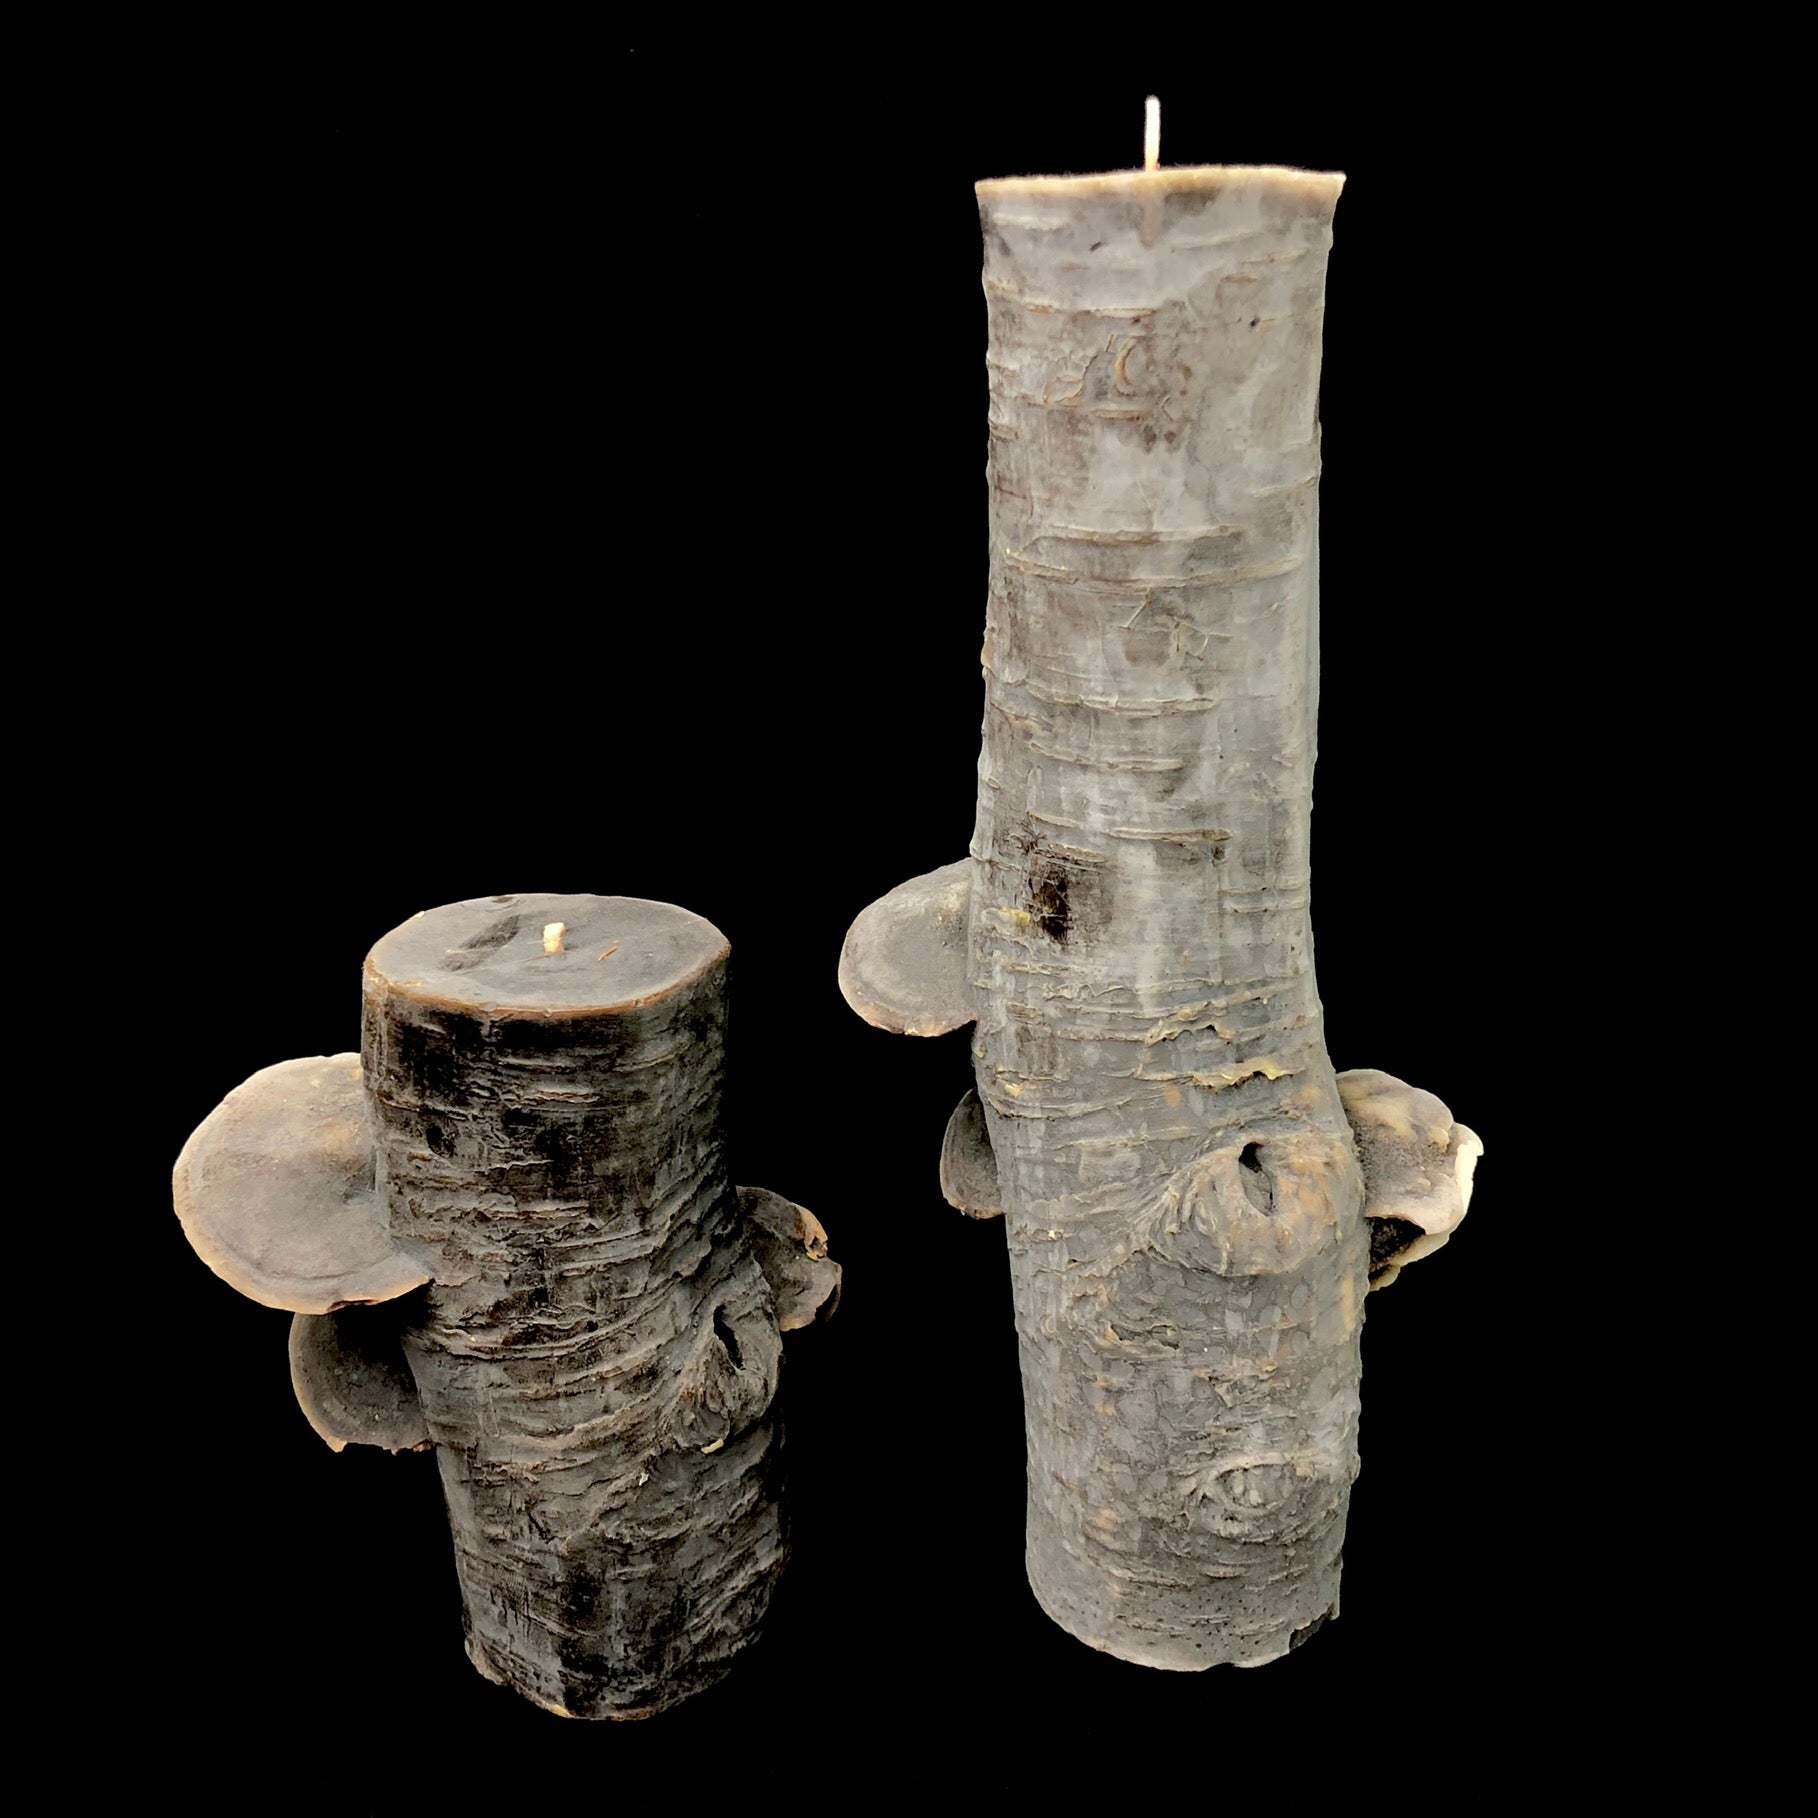 Beeswax Tree Candle shown nest to smaller design option